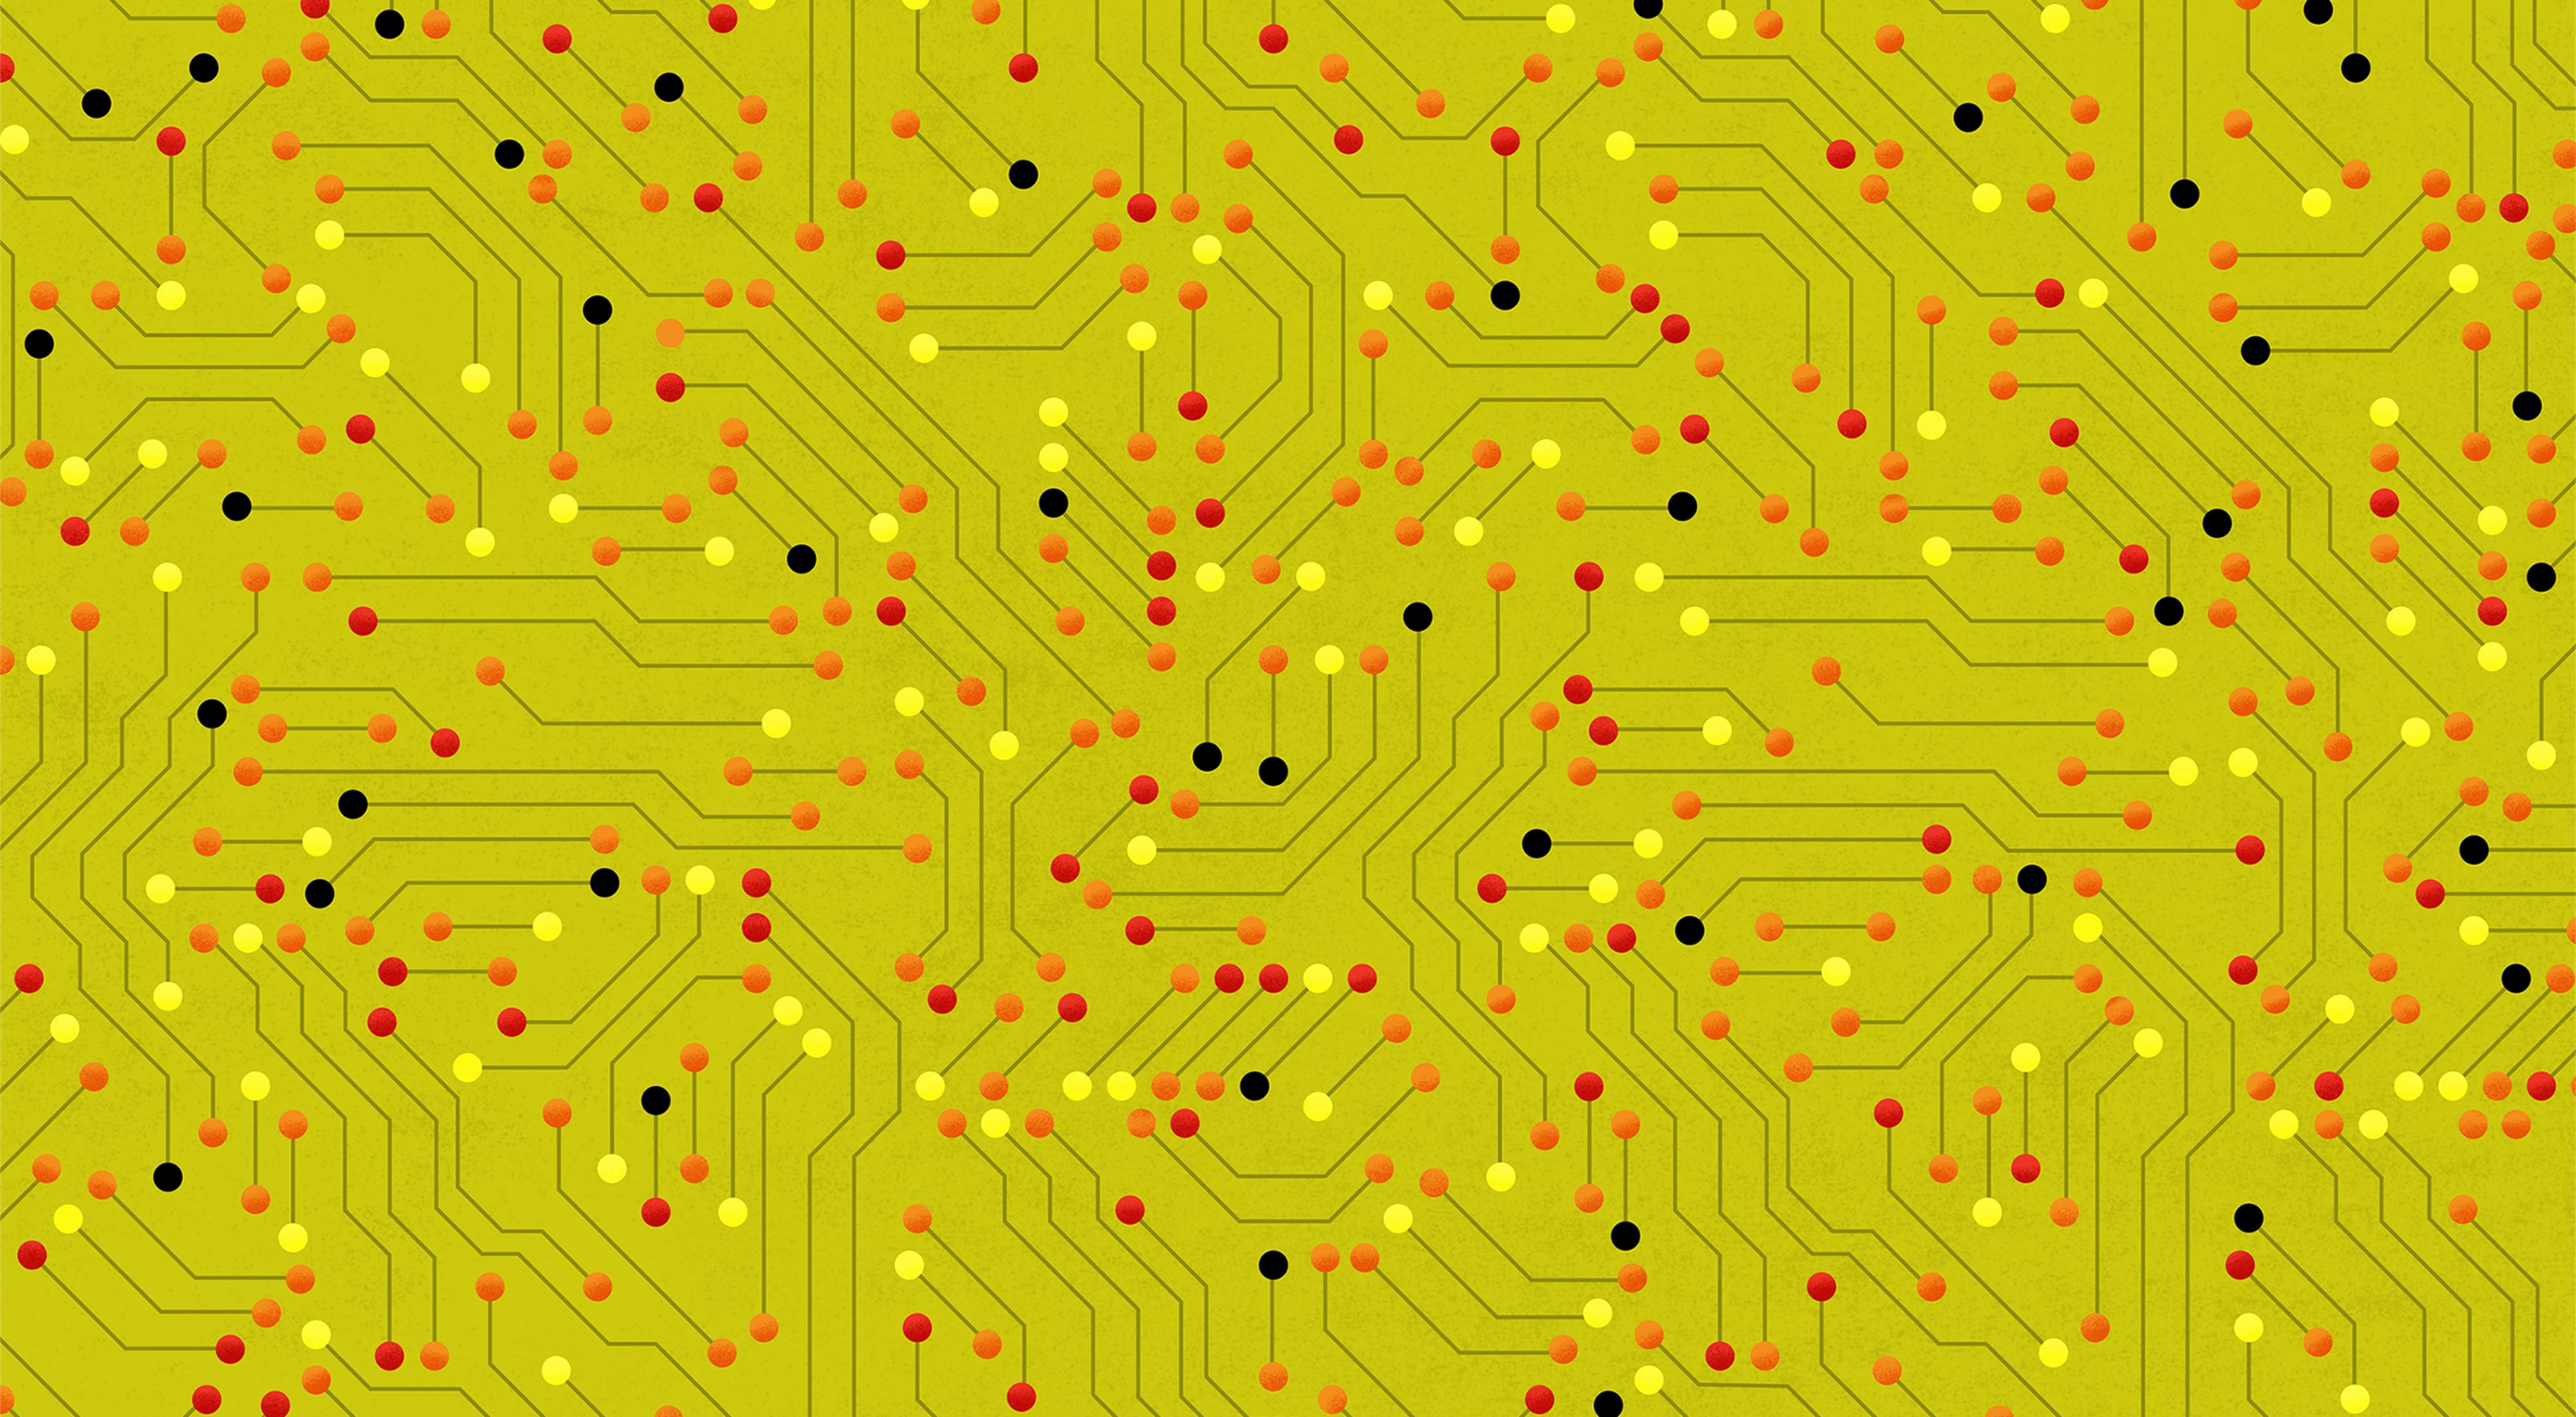 An abstract pattern based on a circuit board, with red, orange, and yellow nodes and a lime green background